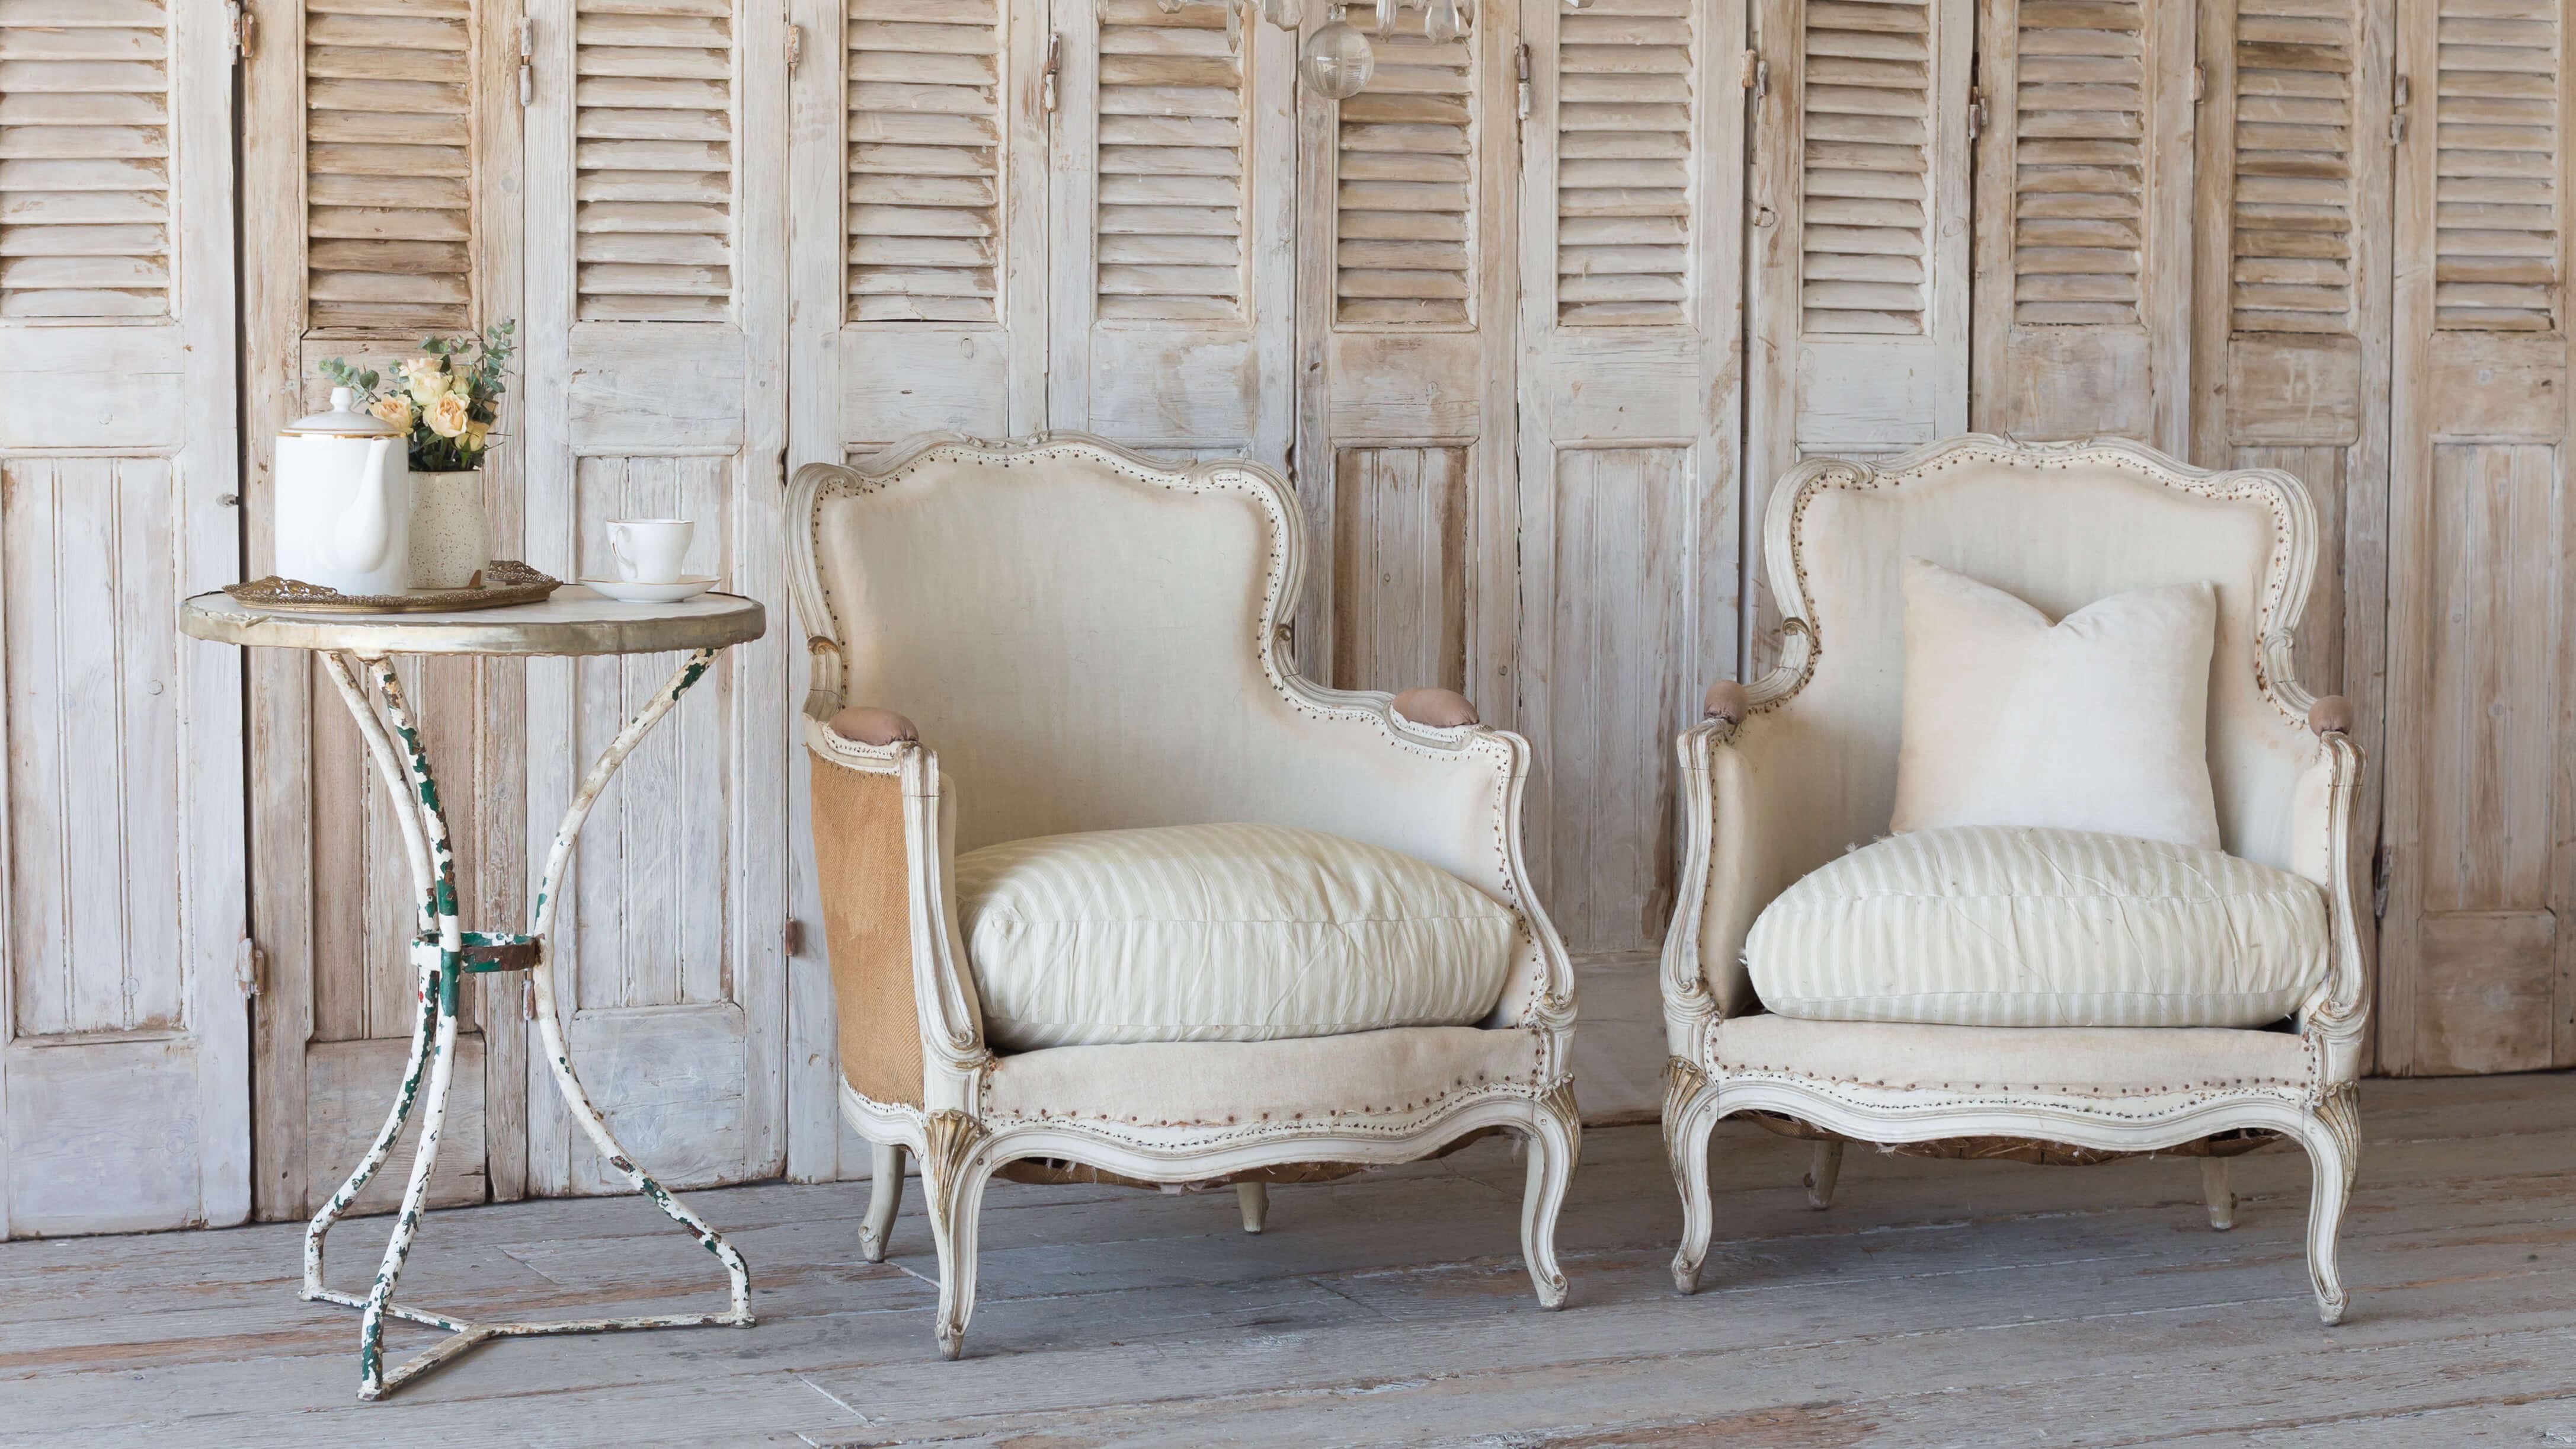 Antique French bergeres in worn creamy white original finish. Beautiful curving carvings and serpentine shape. Original muslin and burlap upholstery with antique sea green and cream stripe ticking.